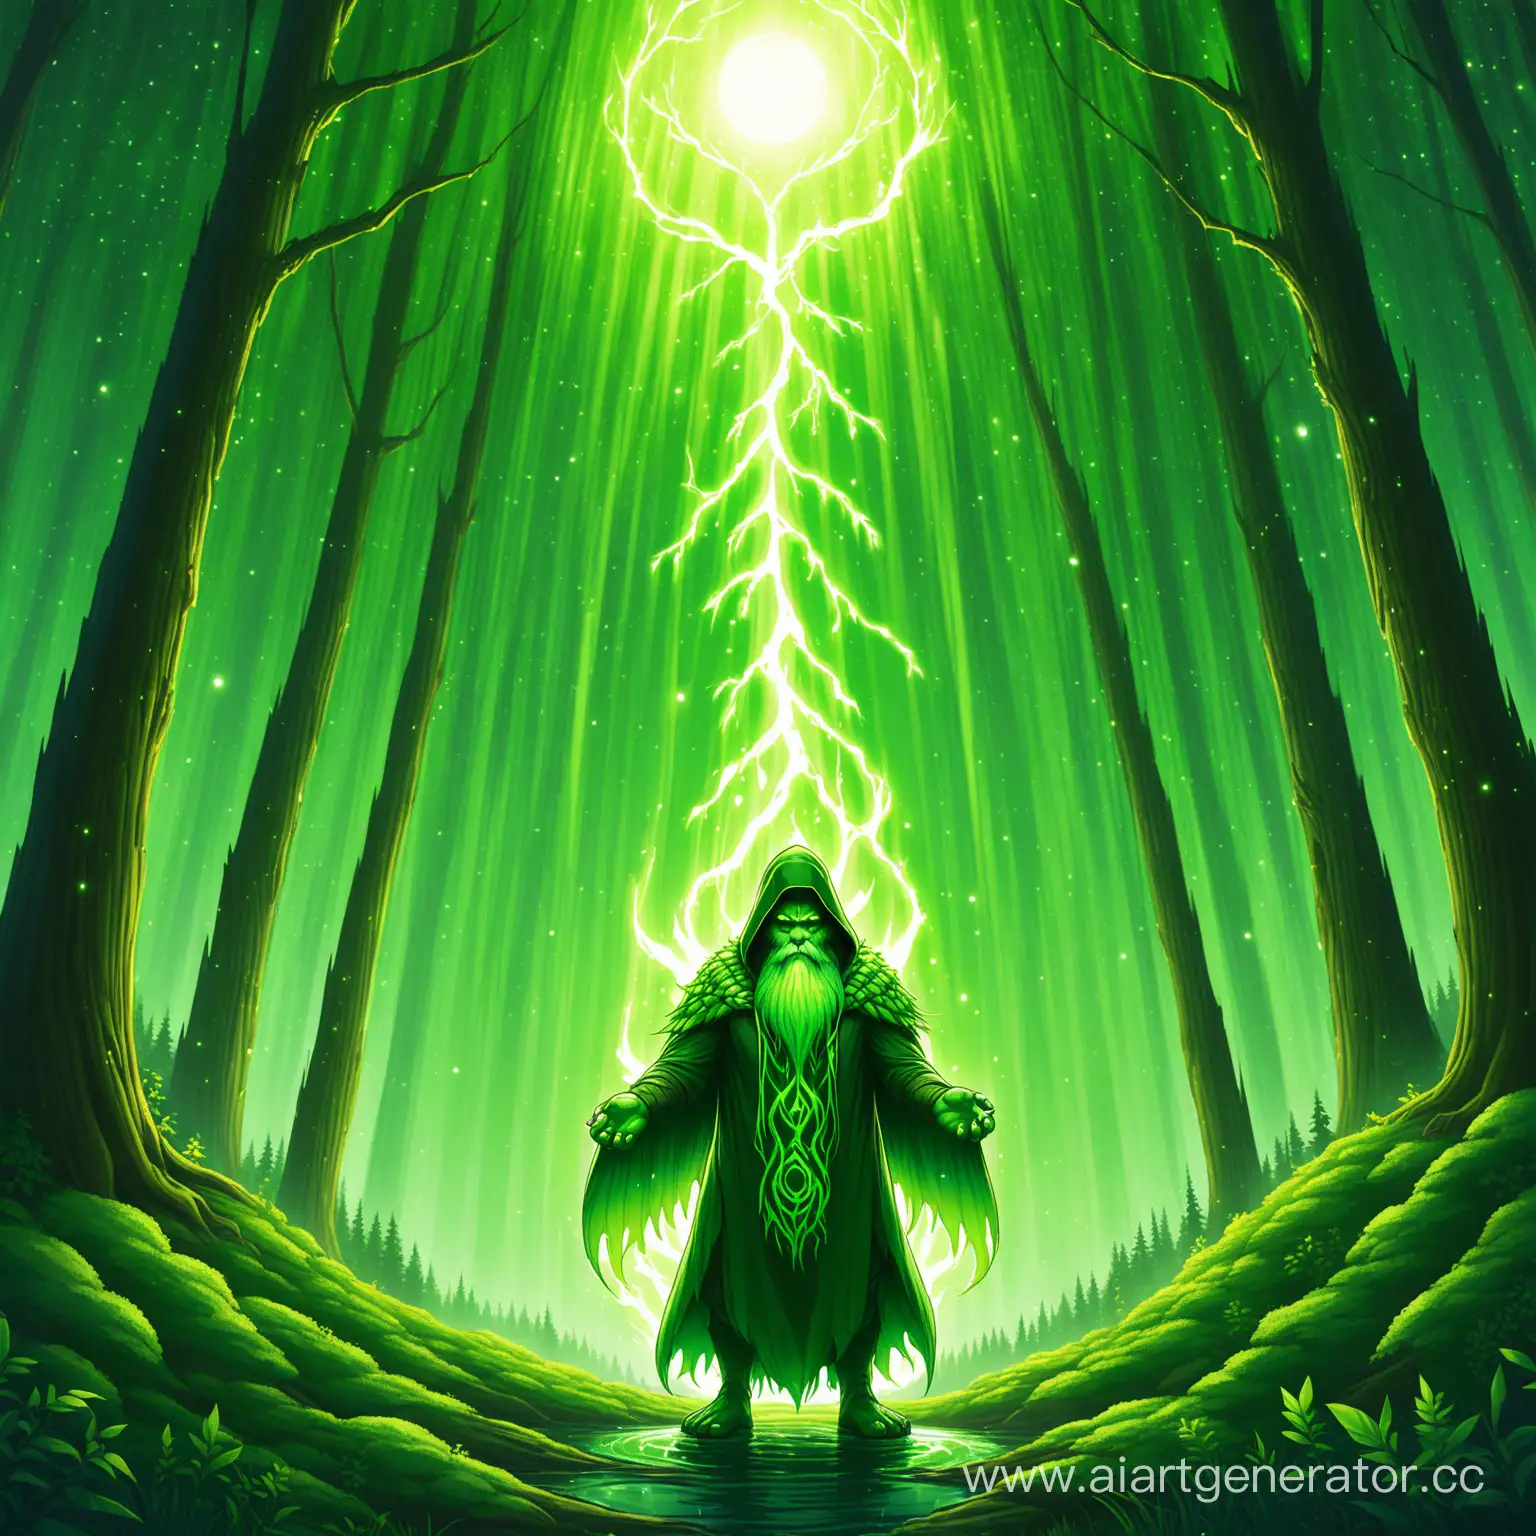 Nature-Prophet-Summoning-Power-on-His-Throne-with-Green-Styling-and-StaffWielding-Cart